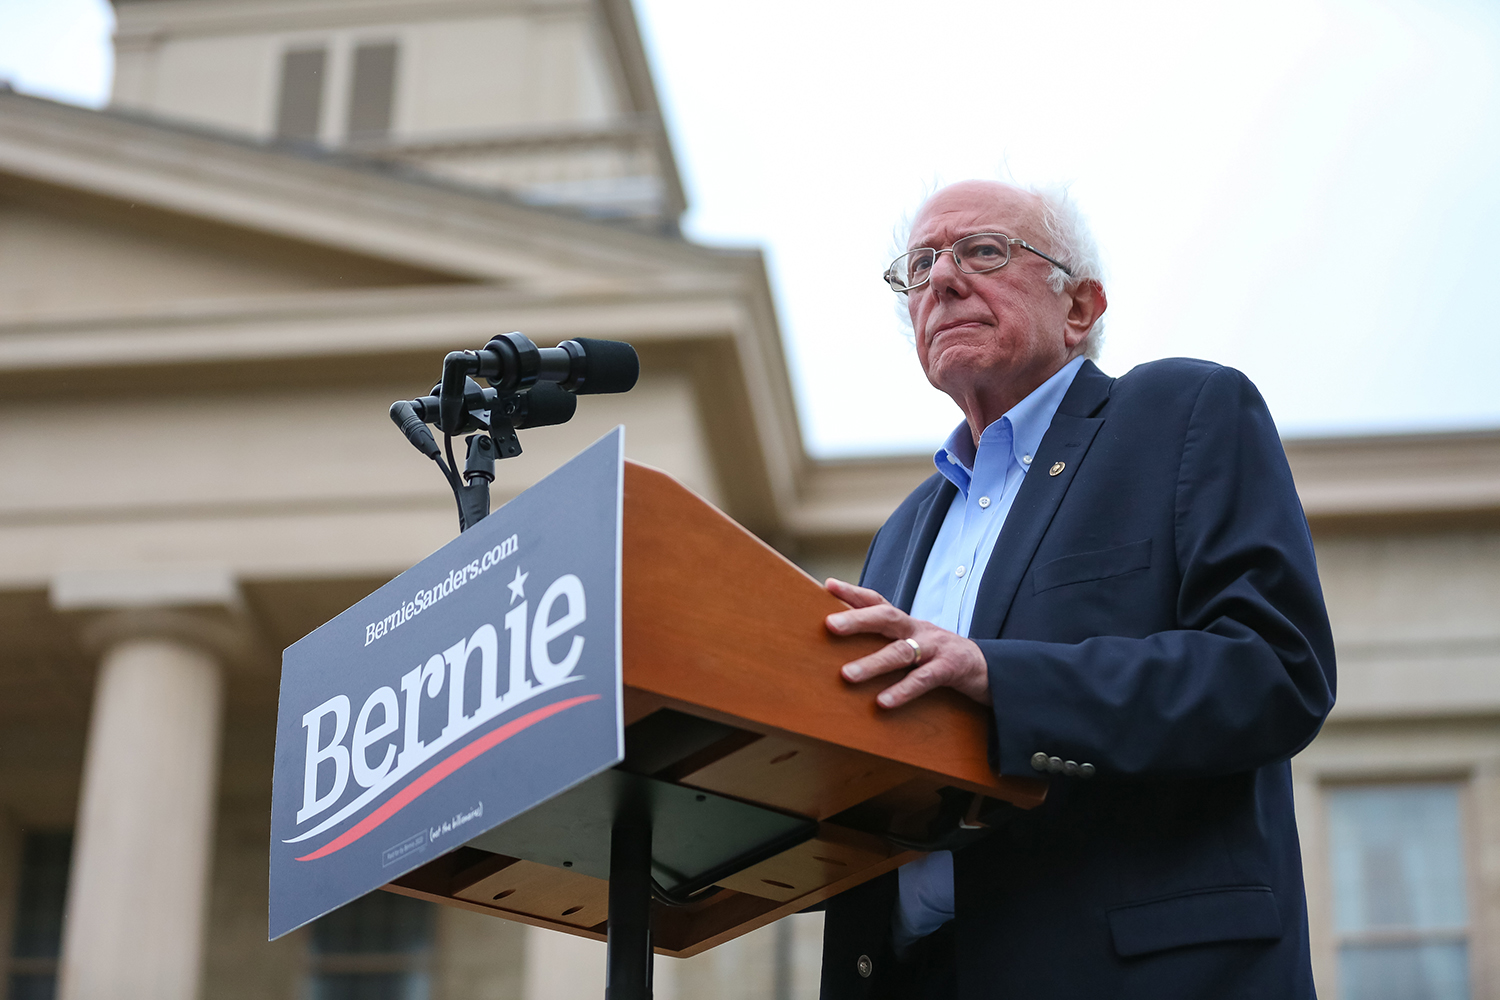  Democratic Presidential Candidate Senator Bernie Sanders (I-VT) speaks during a campaign rally on the Pentacrest at the University of Iowa in Iowa City on Sunday, Sep. 8, 2019.  